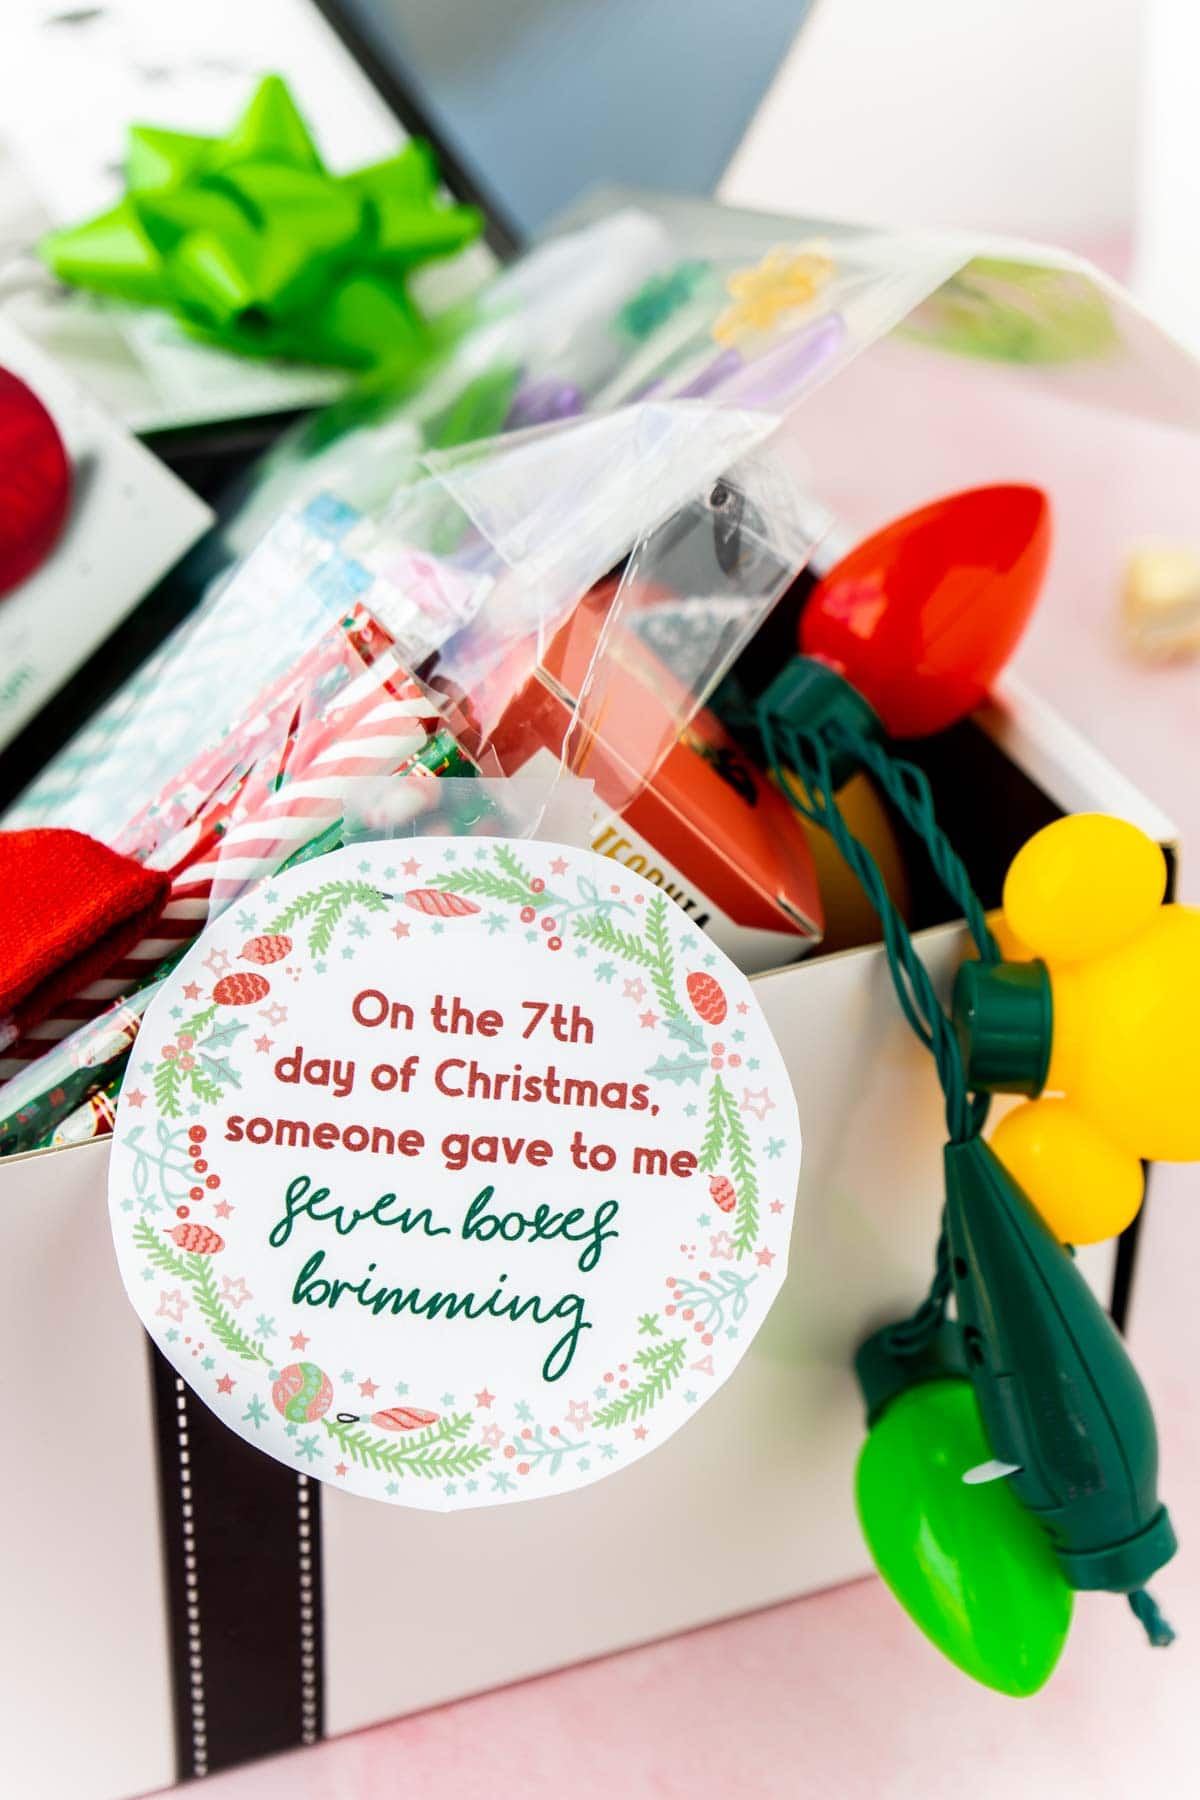 Creative 12 Days of Christmas Gifts   FREE Gift Tags - 32